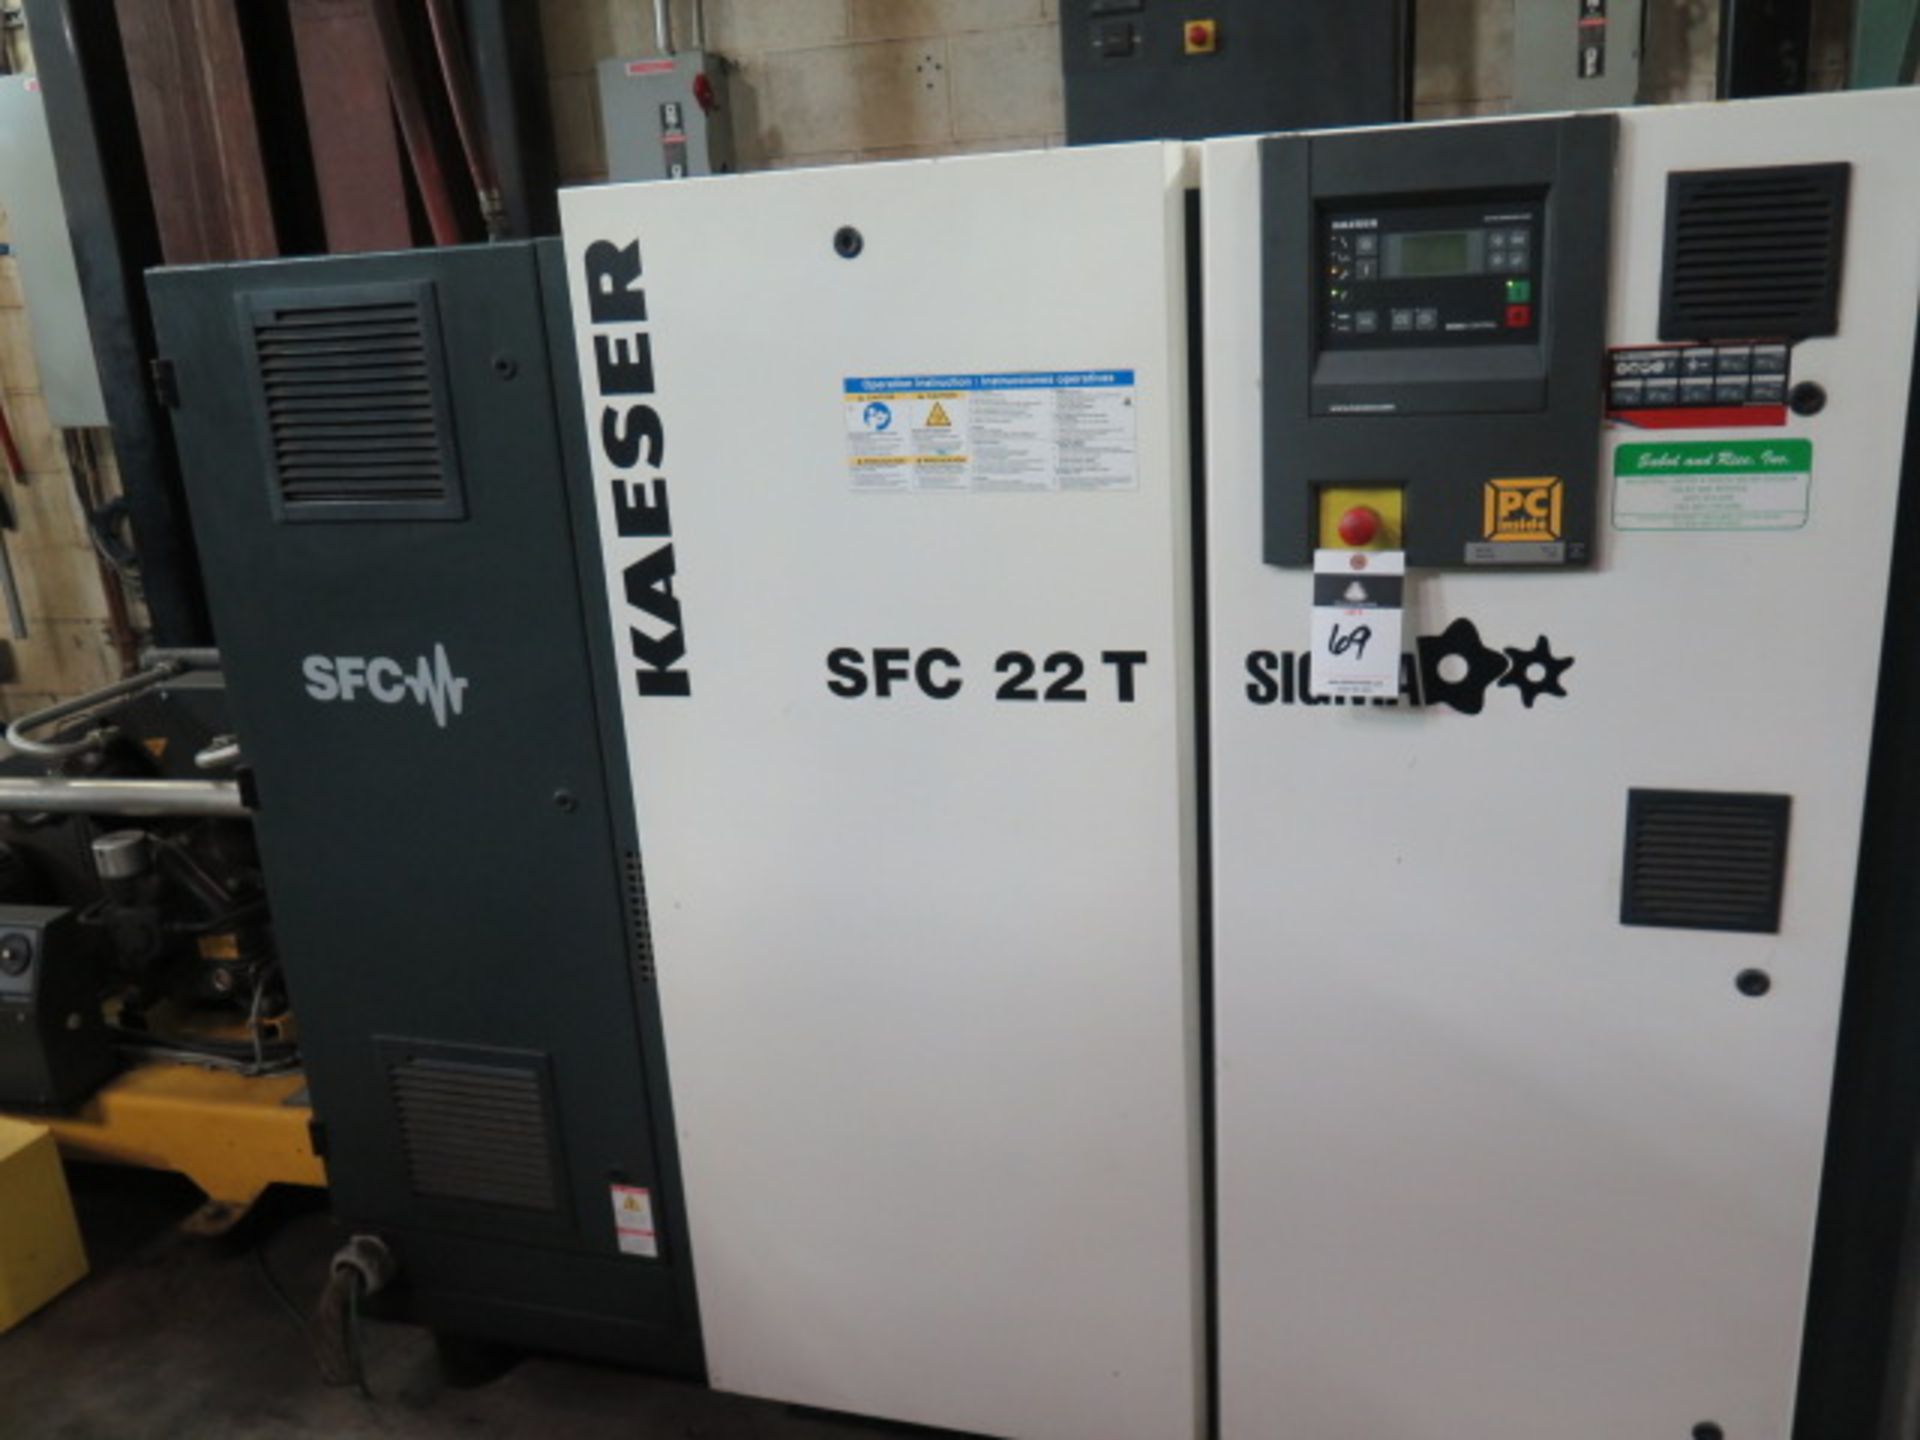 2008 Kaeser SFC227 Nitrogen Generation System w/ Kaeser Rotary Compressor, Booster Comp, SOLD AS IS - Image 2 of 15